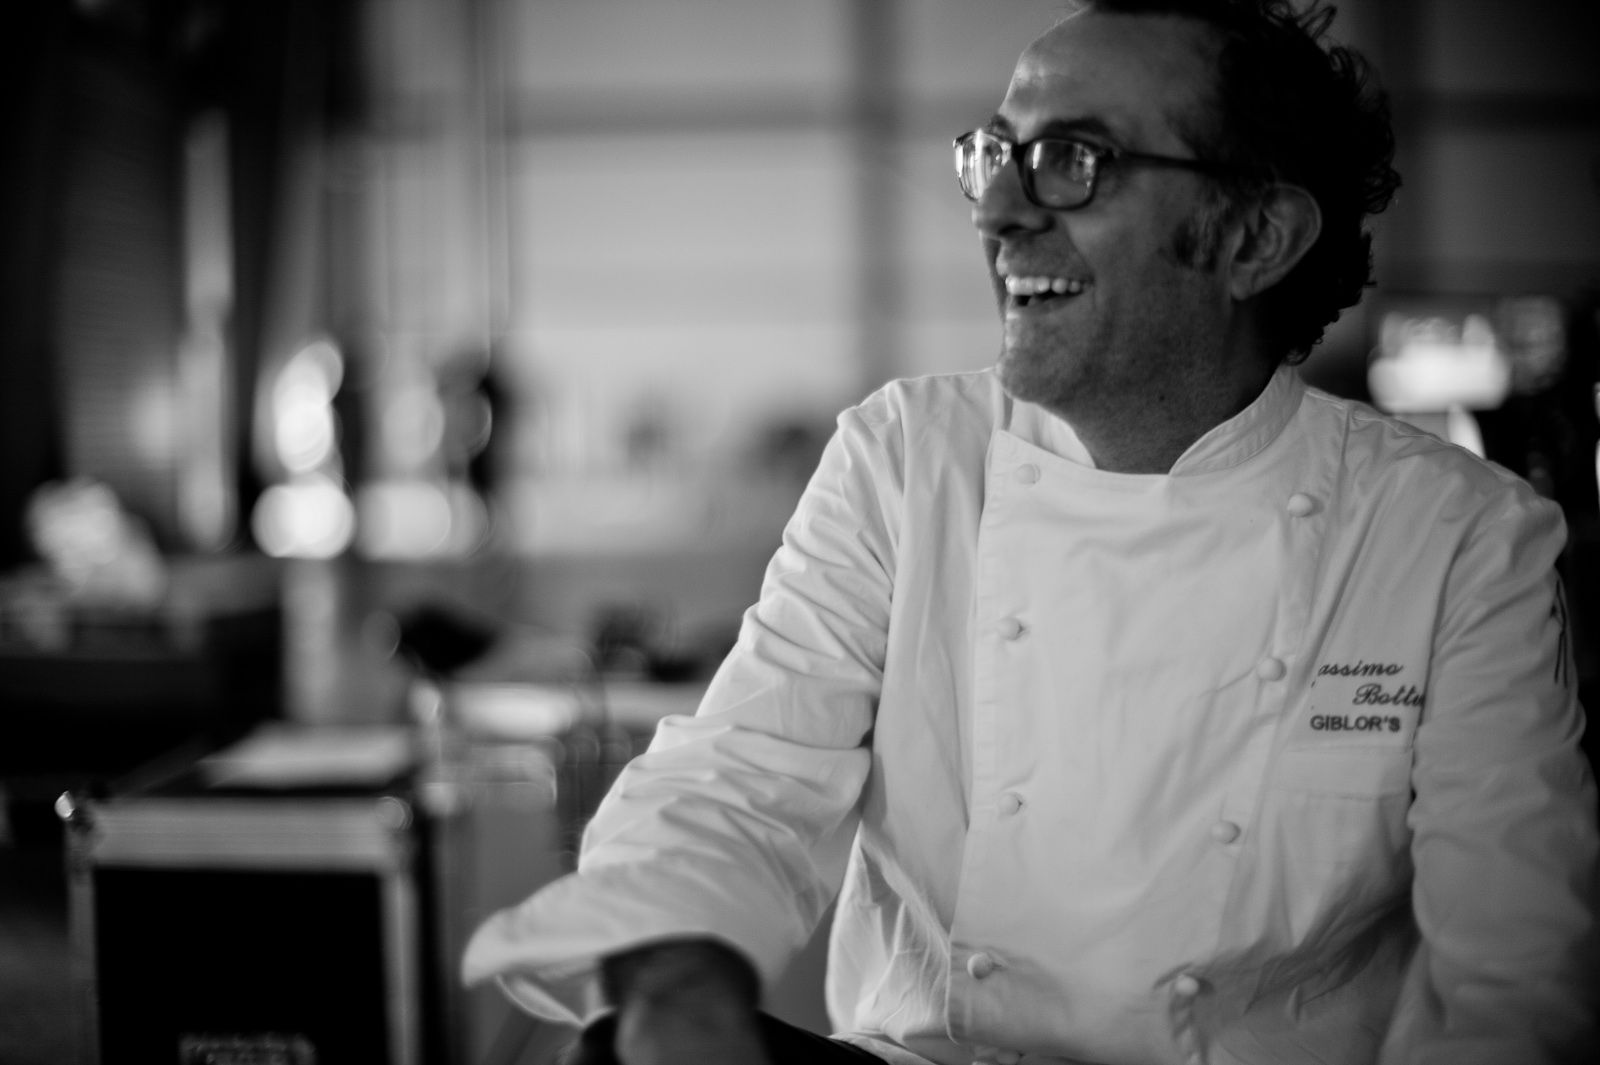 Portrait of Chef Massimo Bottura, Osteria Francescana. "As any fisherman will tell you, to get the best fish, you have to go deep ... don't take shortcuts."